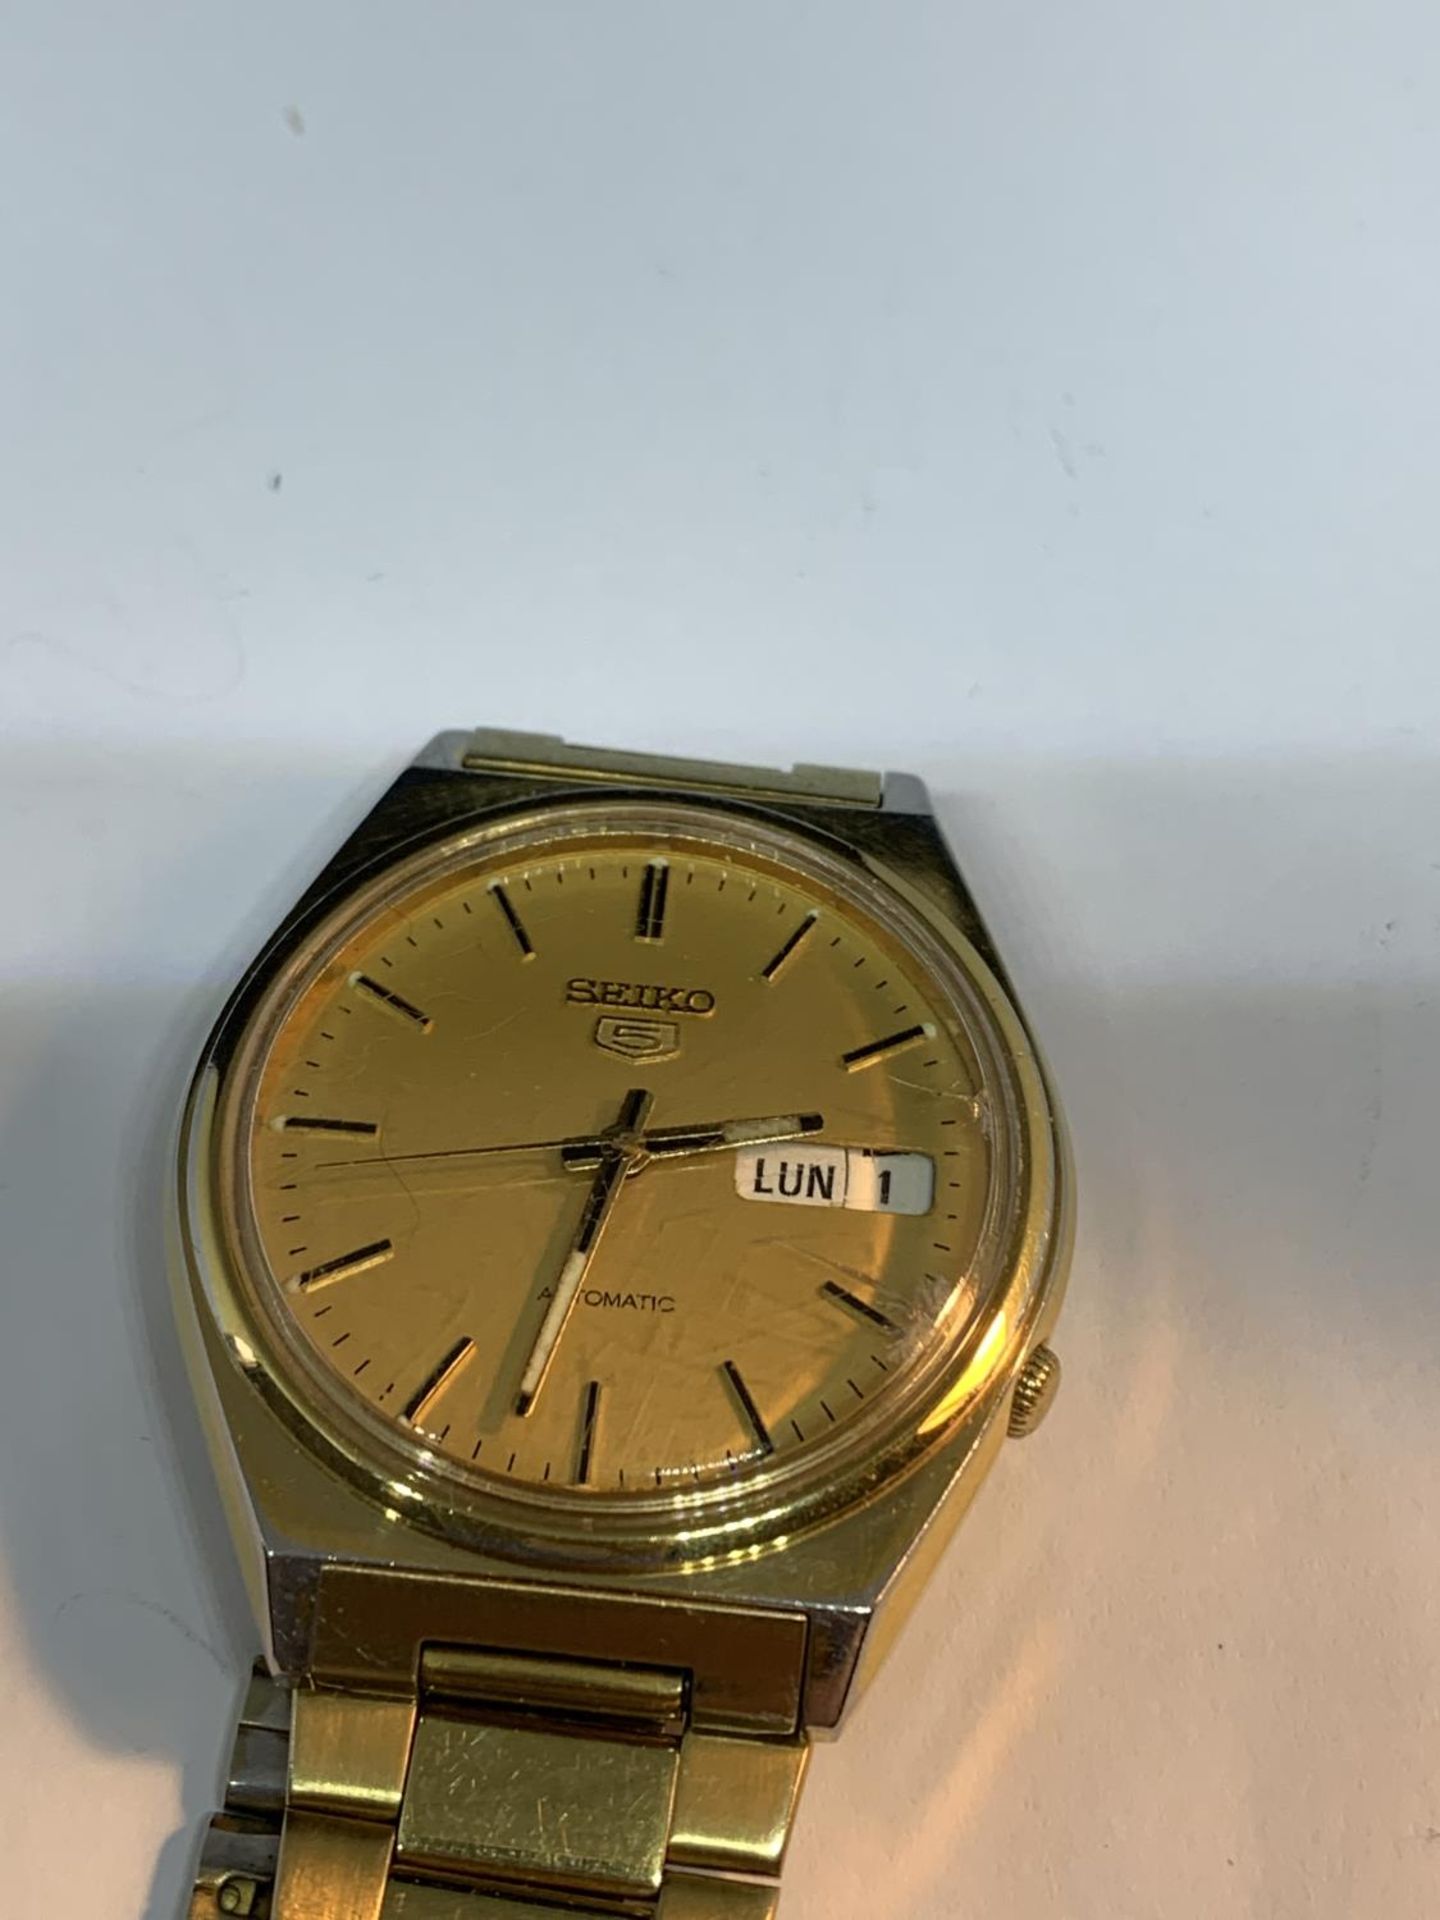 A SEIKO AUTOMATIC WRIST WATCH SEEN WORKING BUT NO WARRANTY - Image 2 of 2